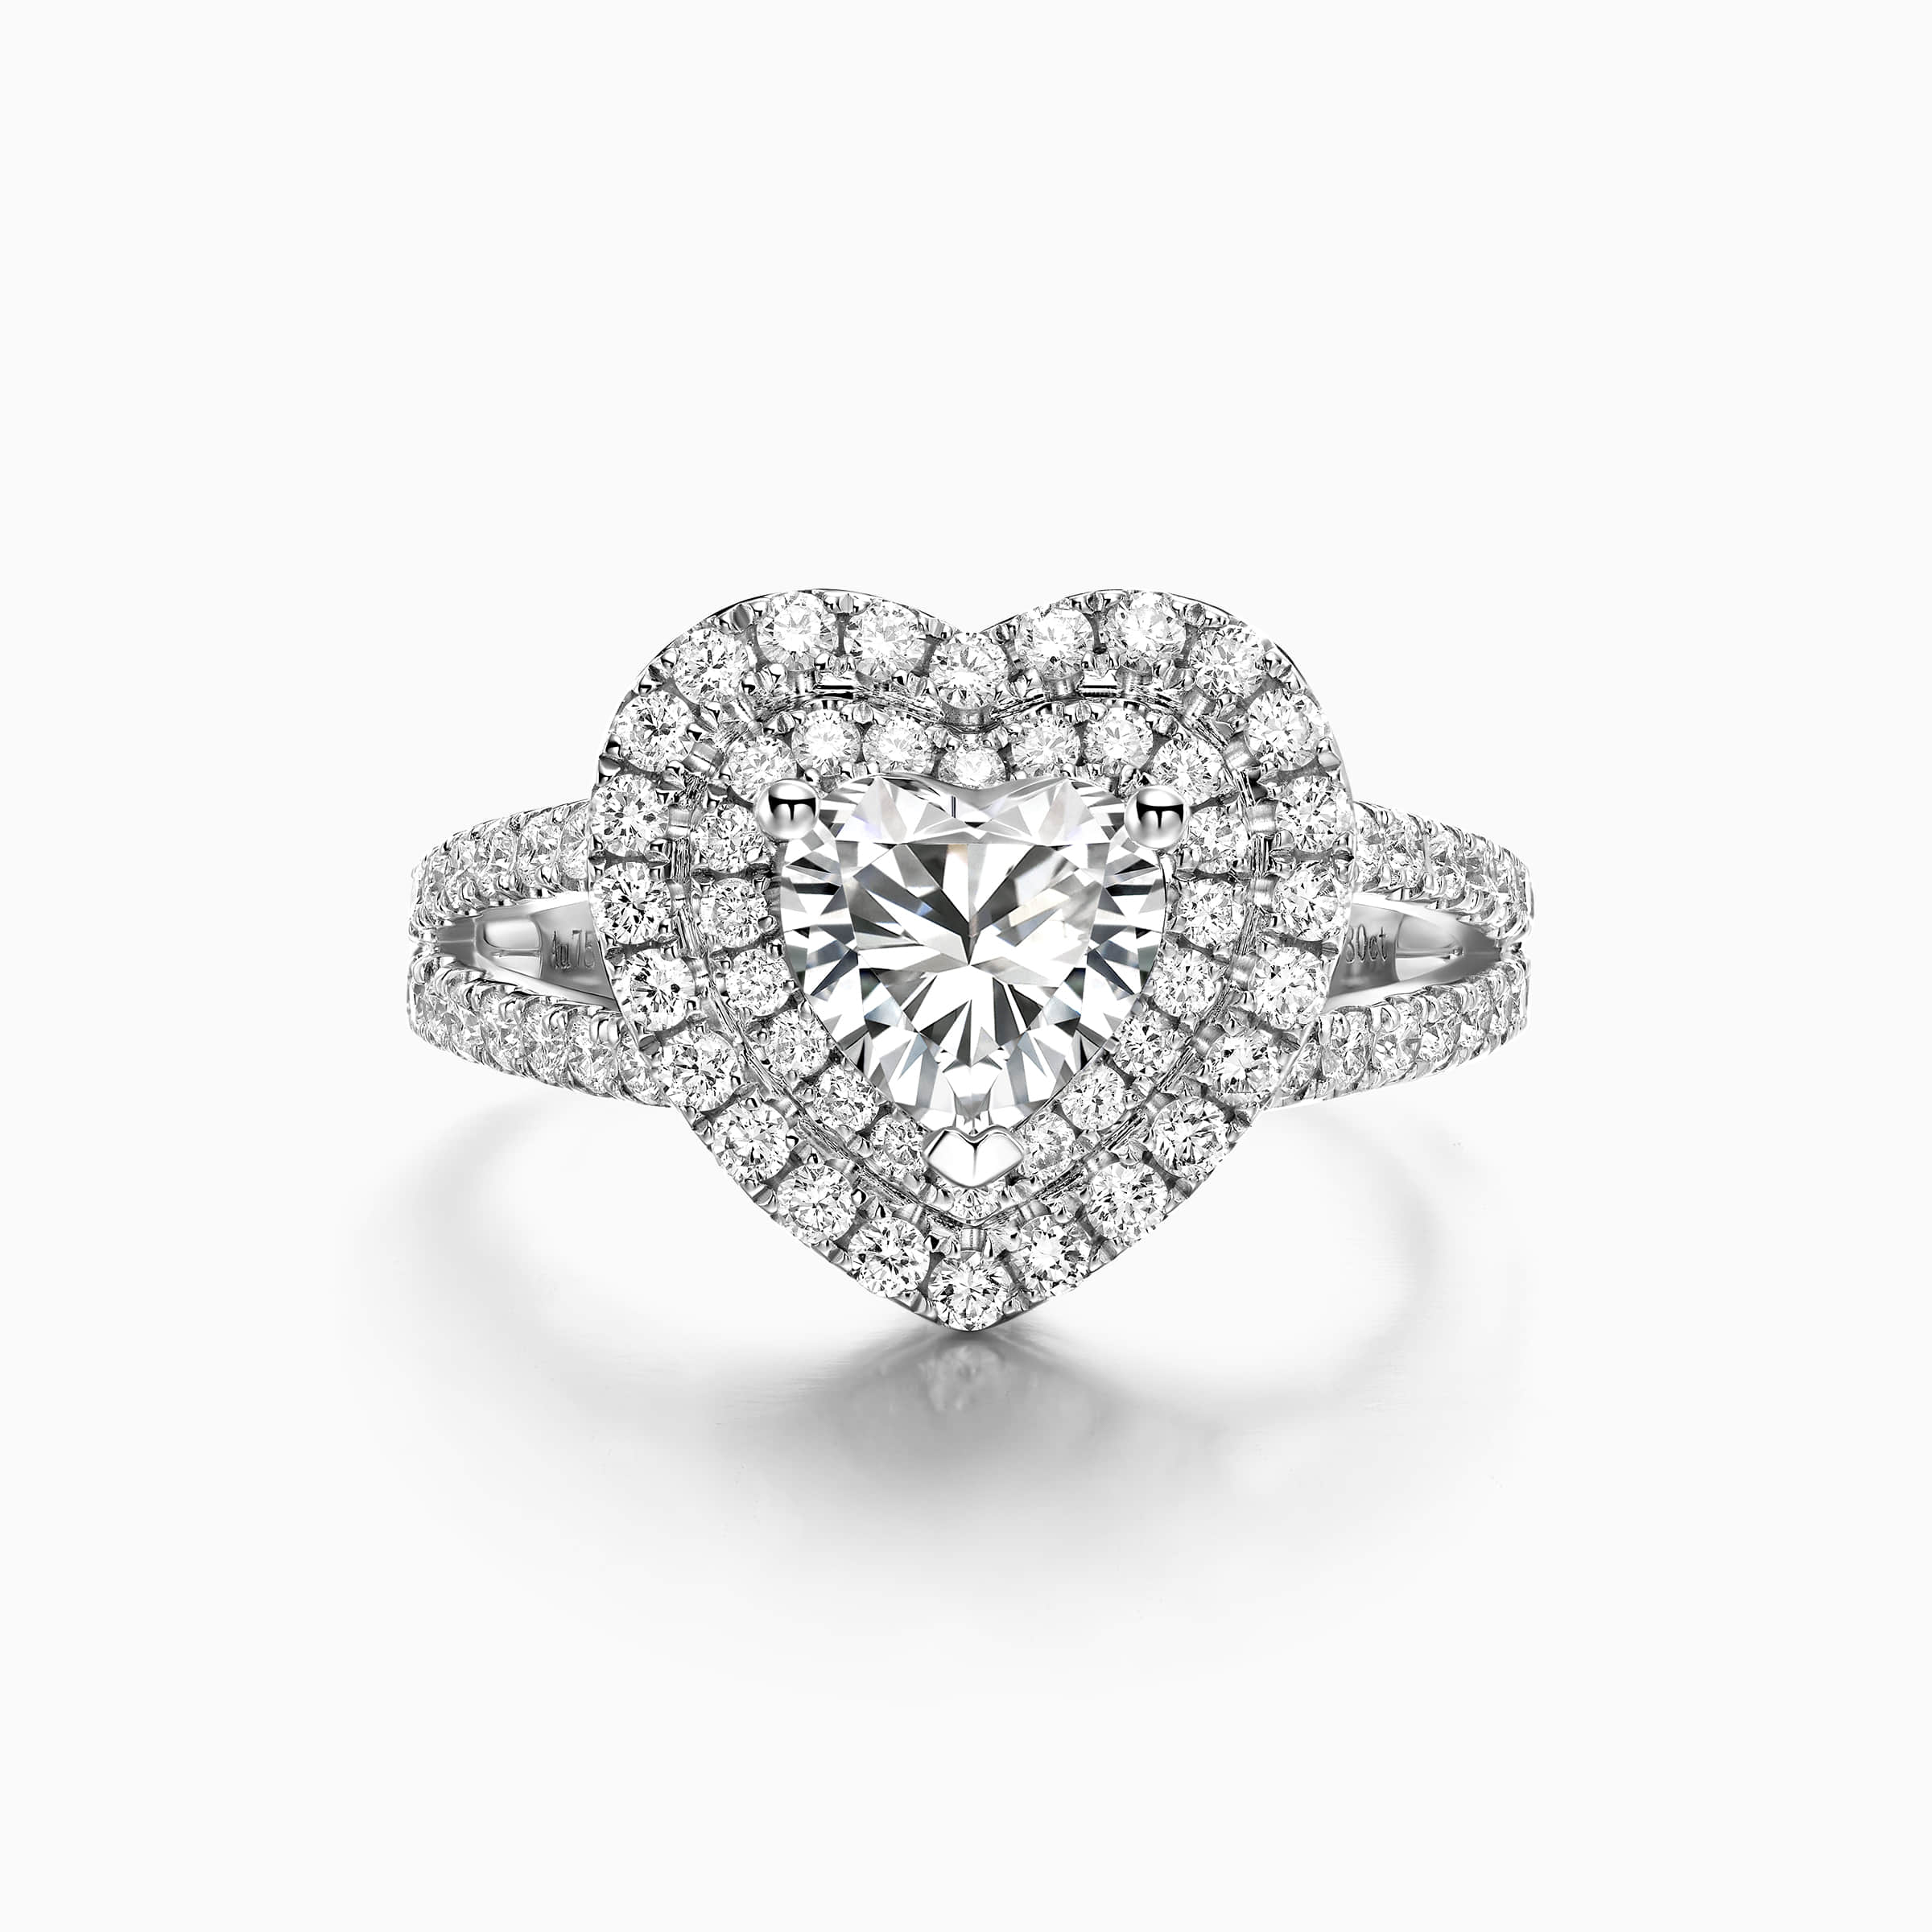 Darry Ring double halo heart engagement ring in white gold